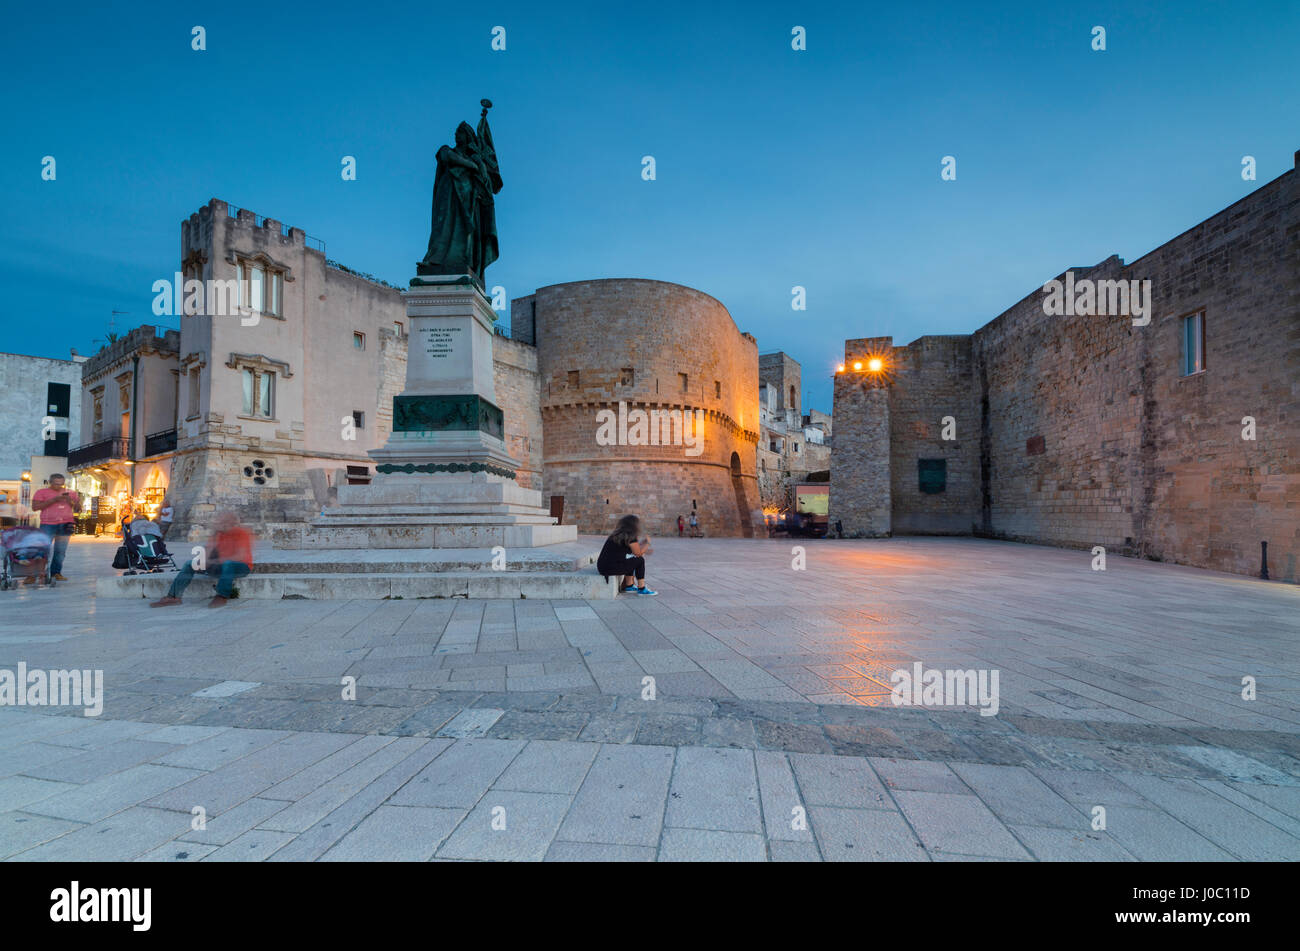 Dusk lights on the medieval fortress and squares of the old town, Otranto, Province of Lecce, Apulia, Italy Stock Photo